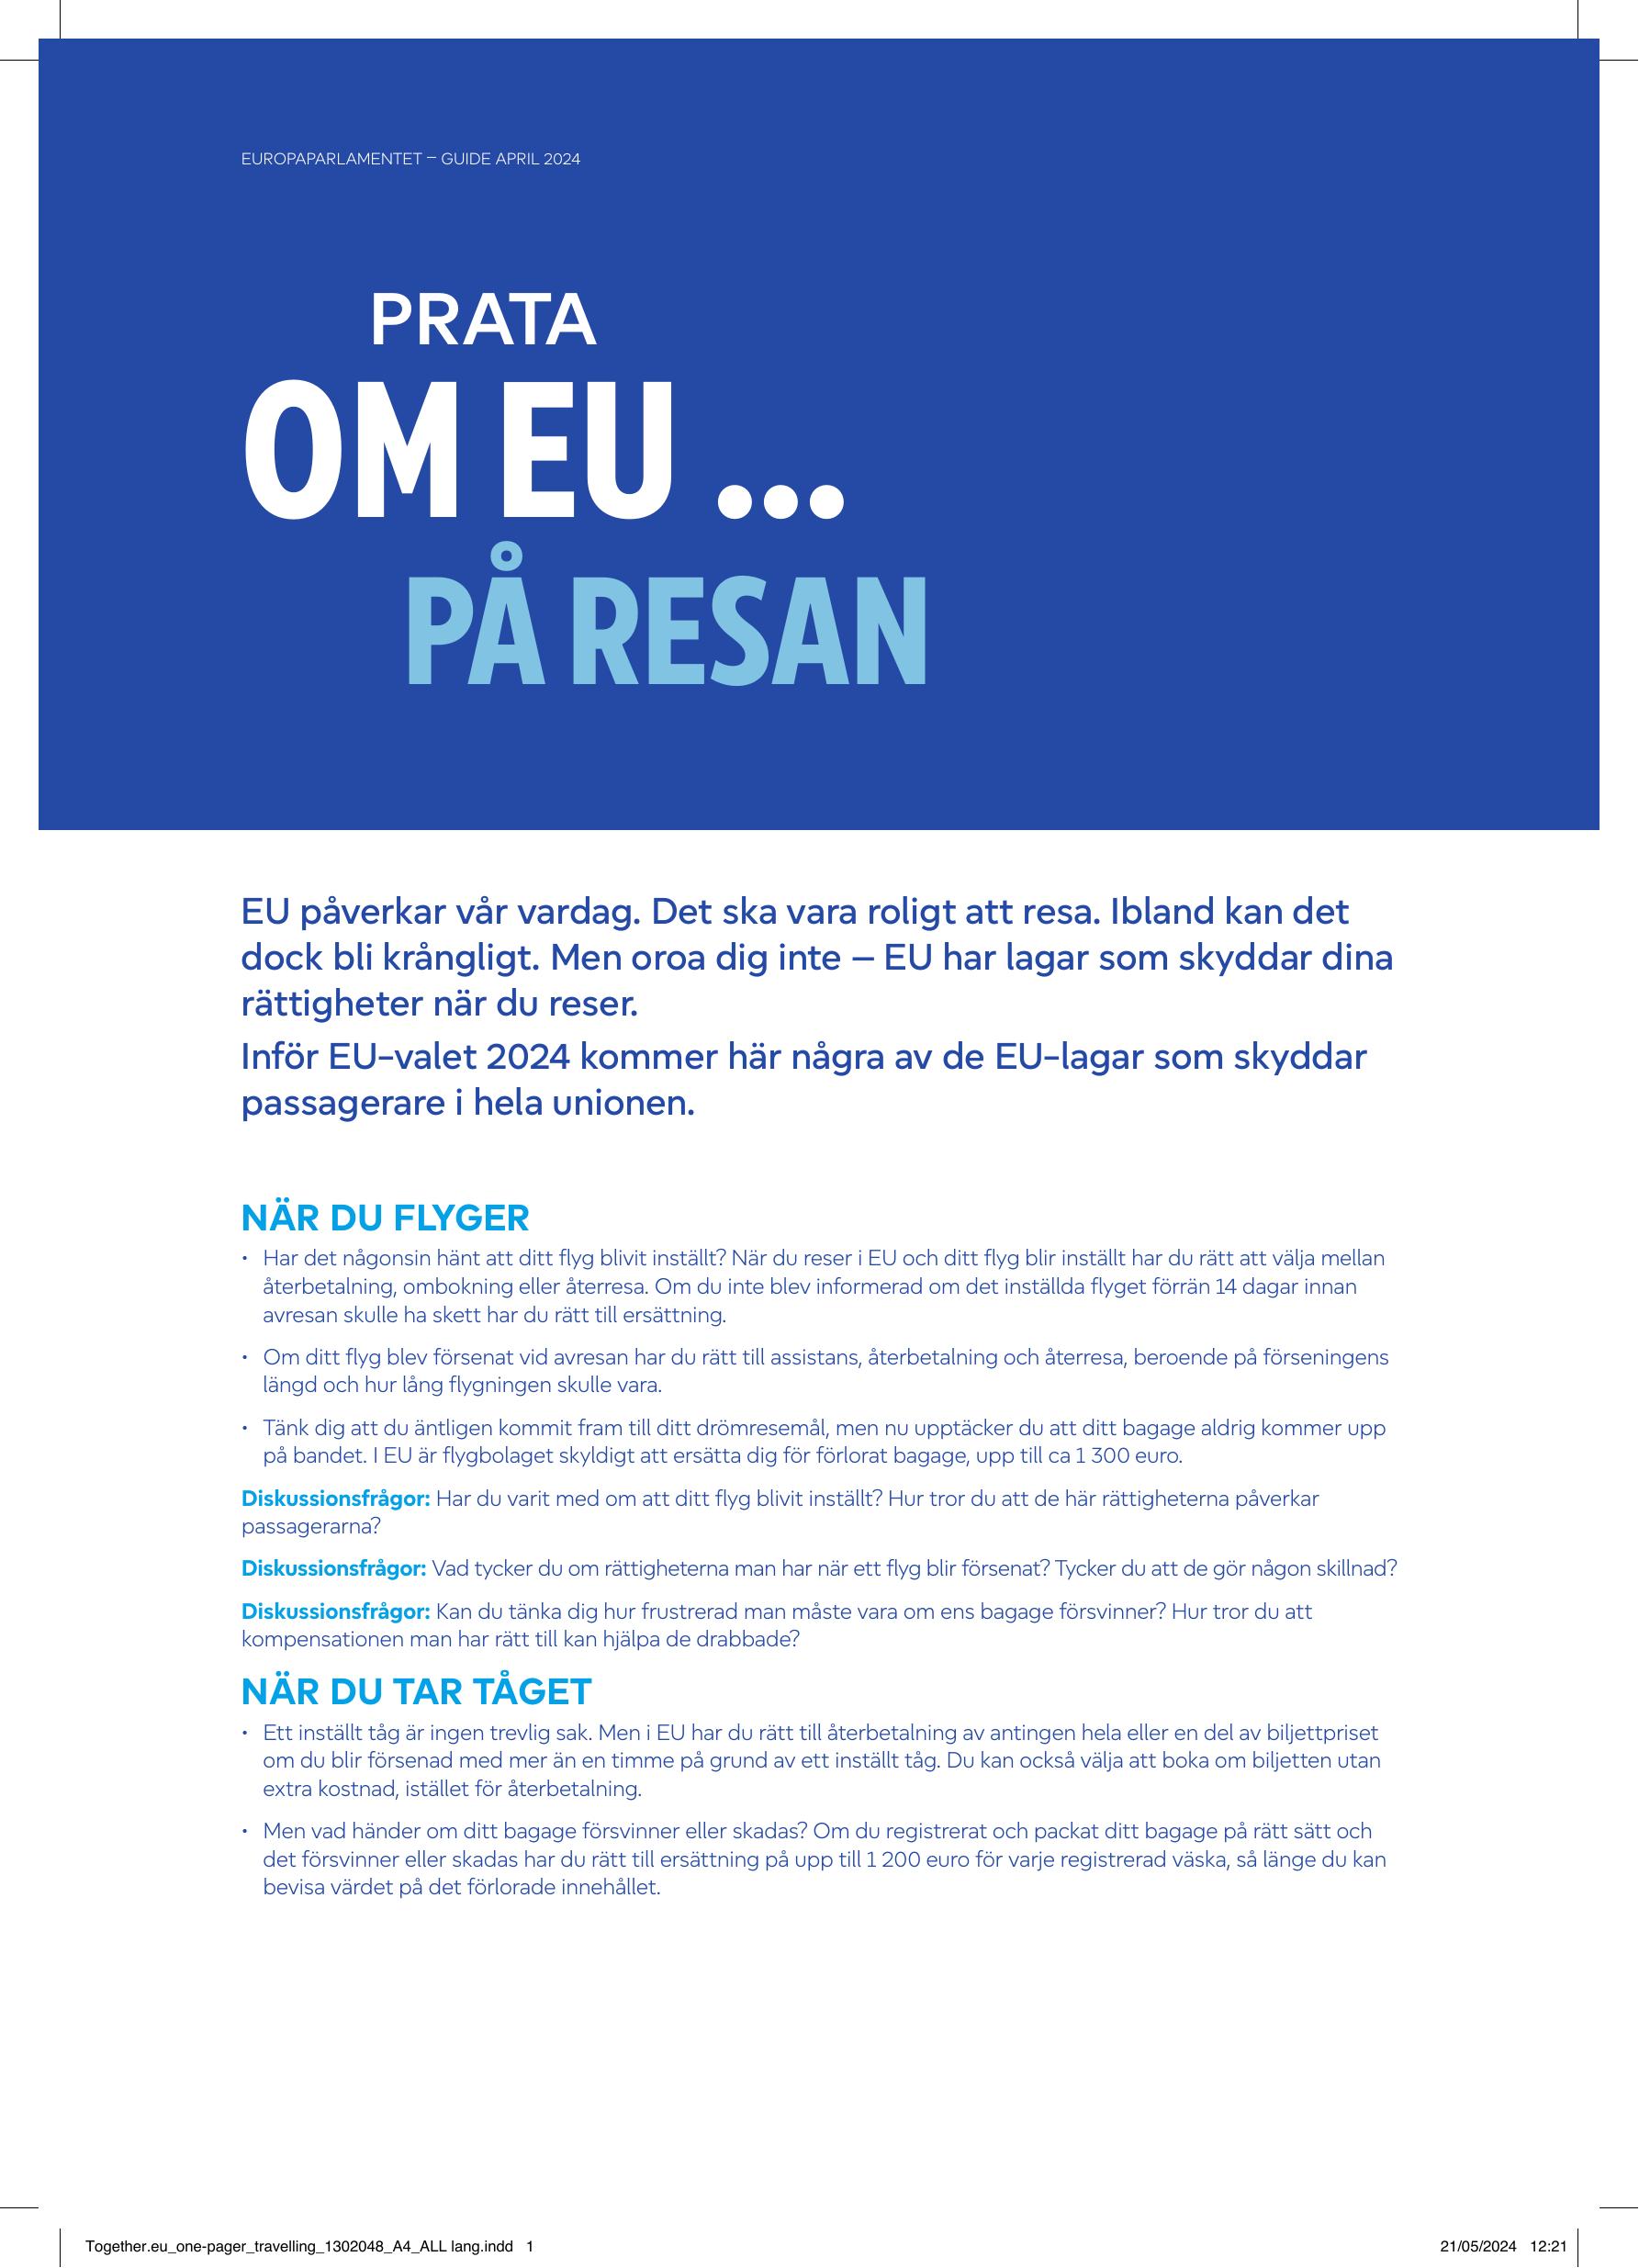 Together.eu_one-pager_travelling_print.pdf